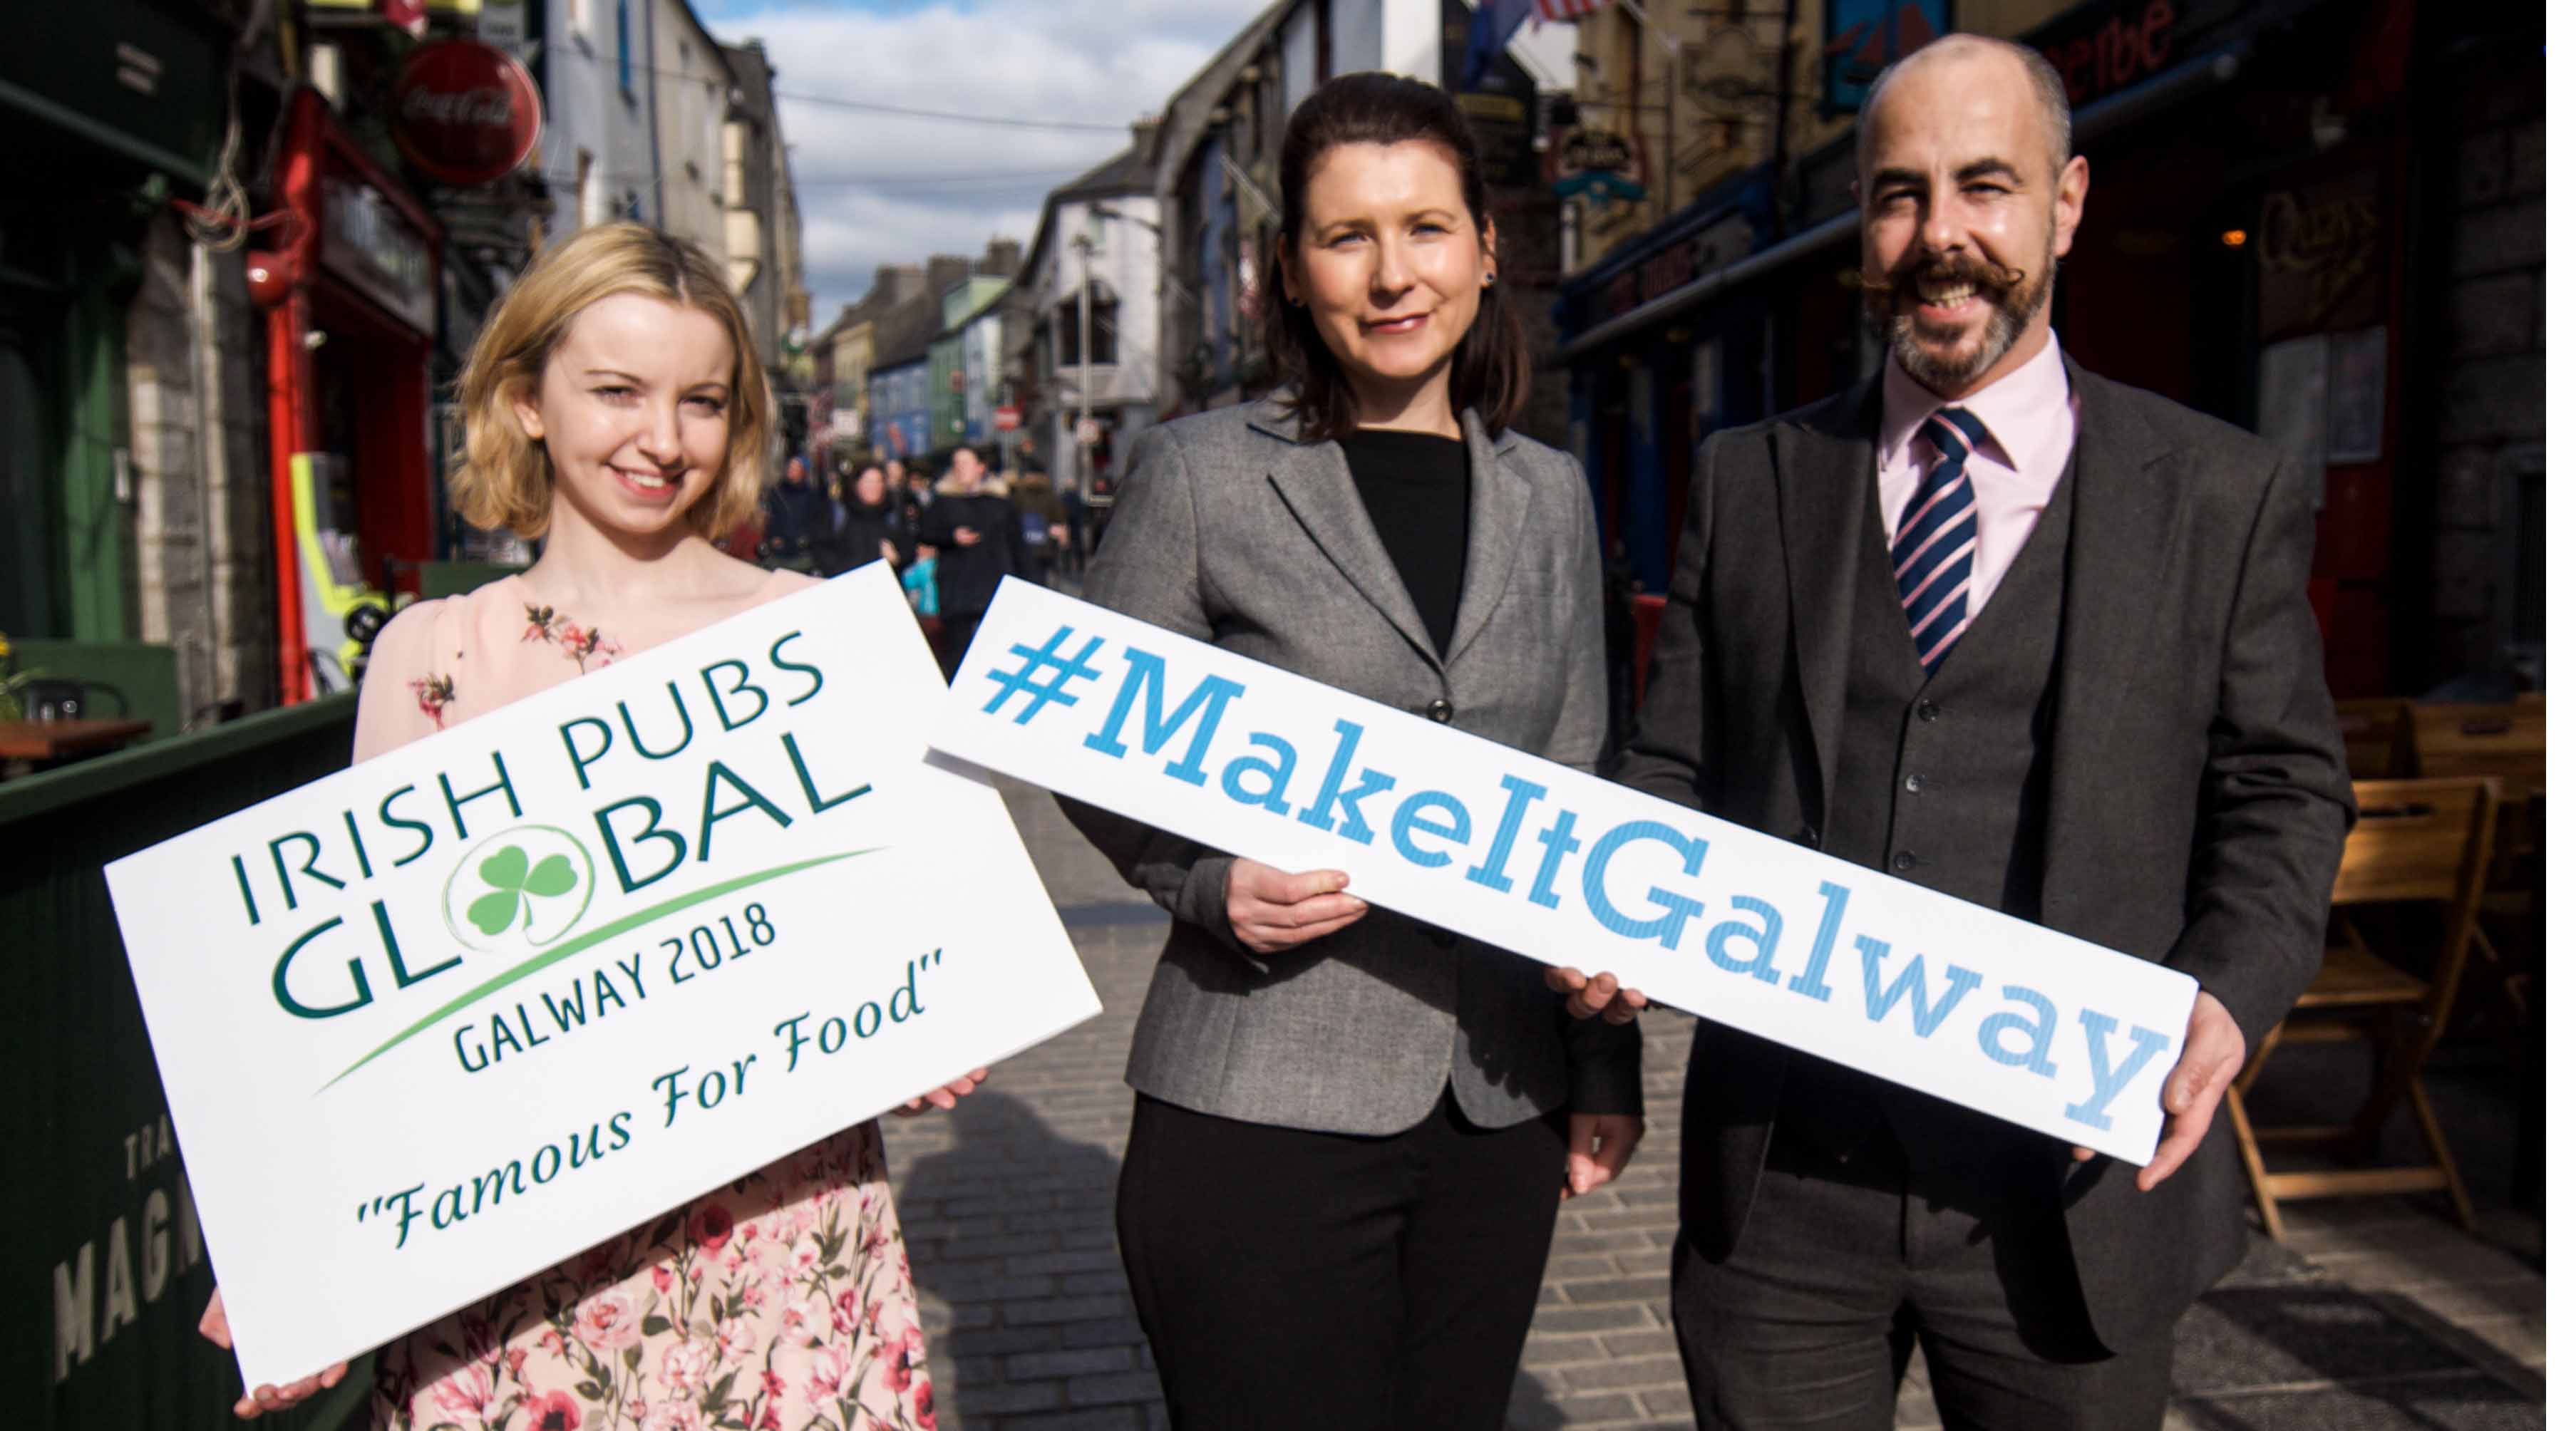 At the launch of this year’s Irish Pubs Global conference in Galway (from left): IPG’s Averyl Quinn, Galway Convention Bureau’s Rose Finn and IPG’s Kevin McParland.